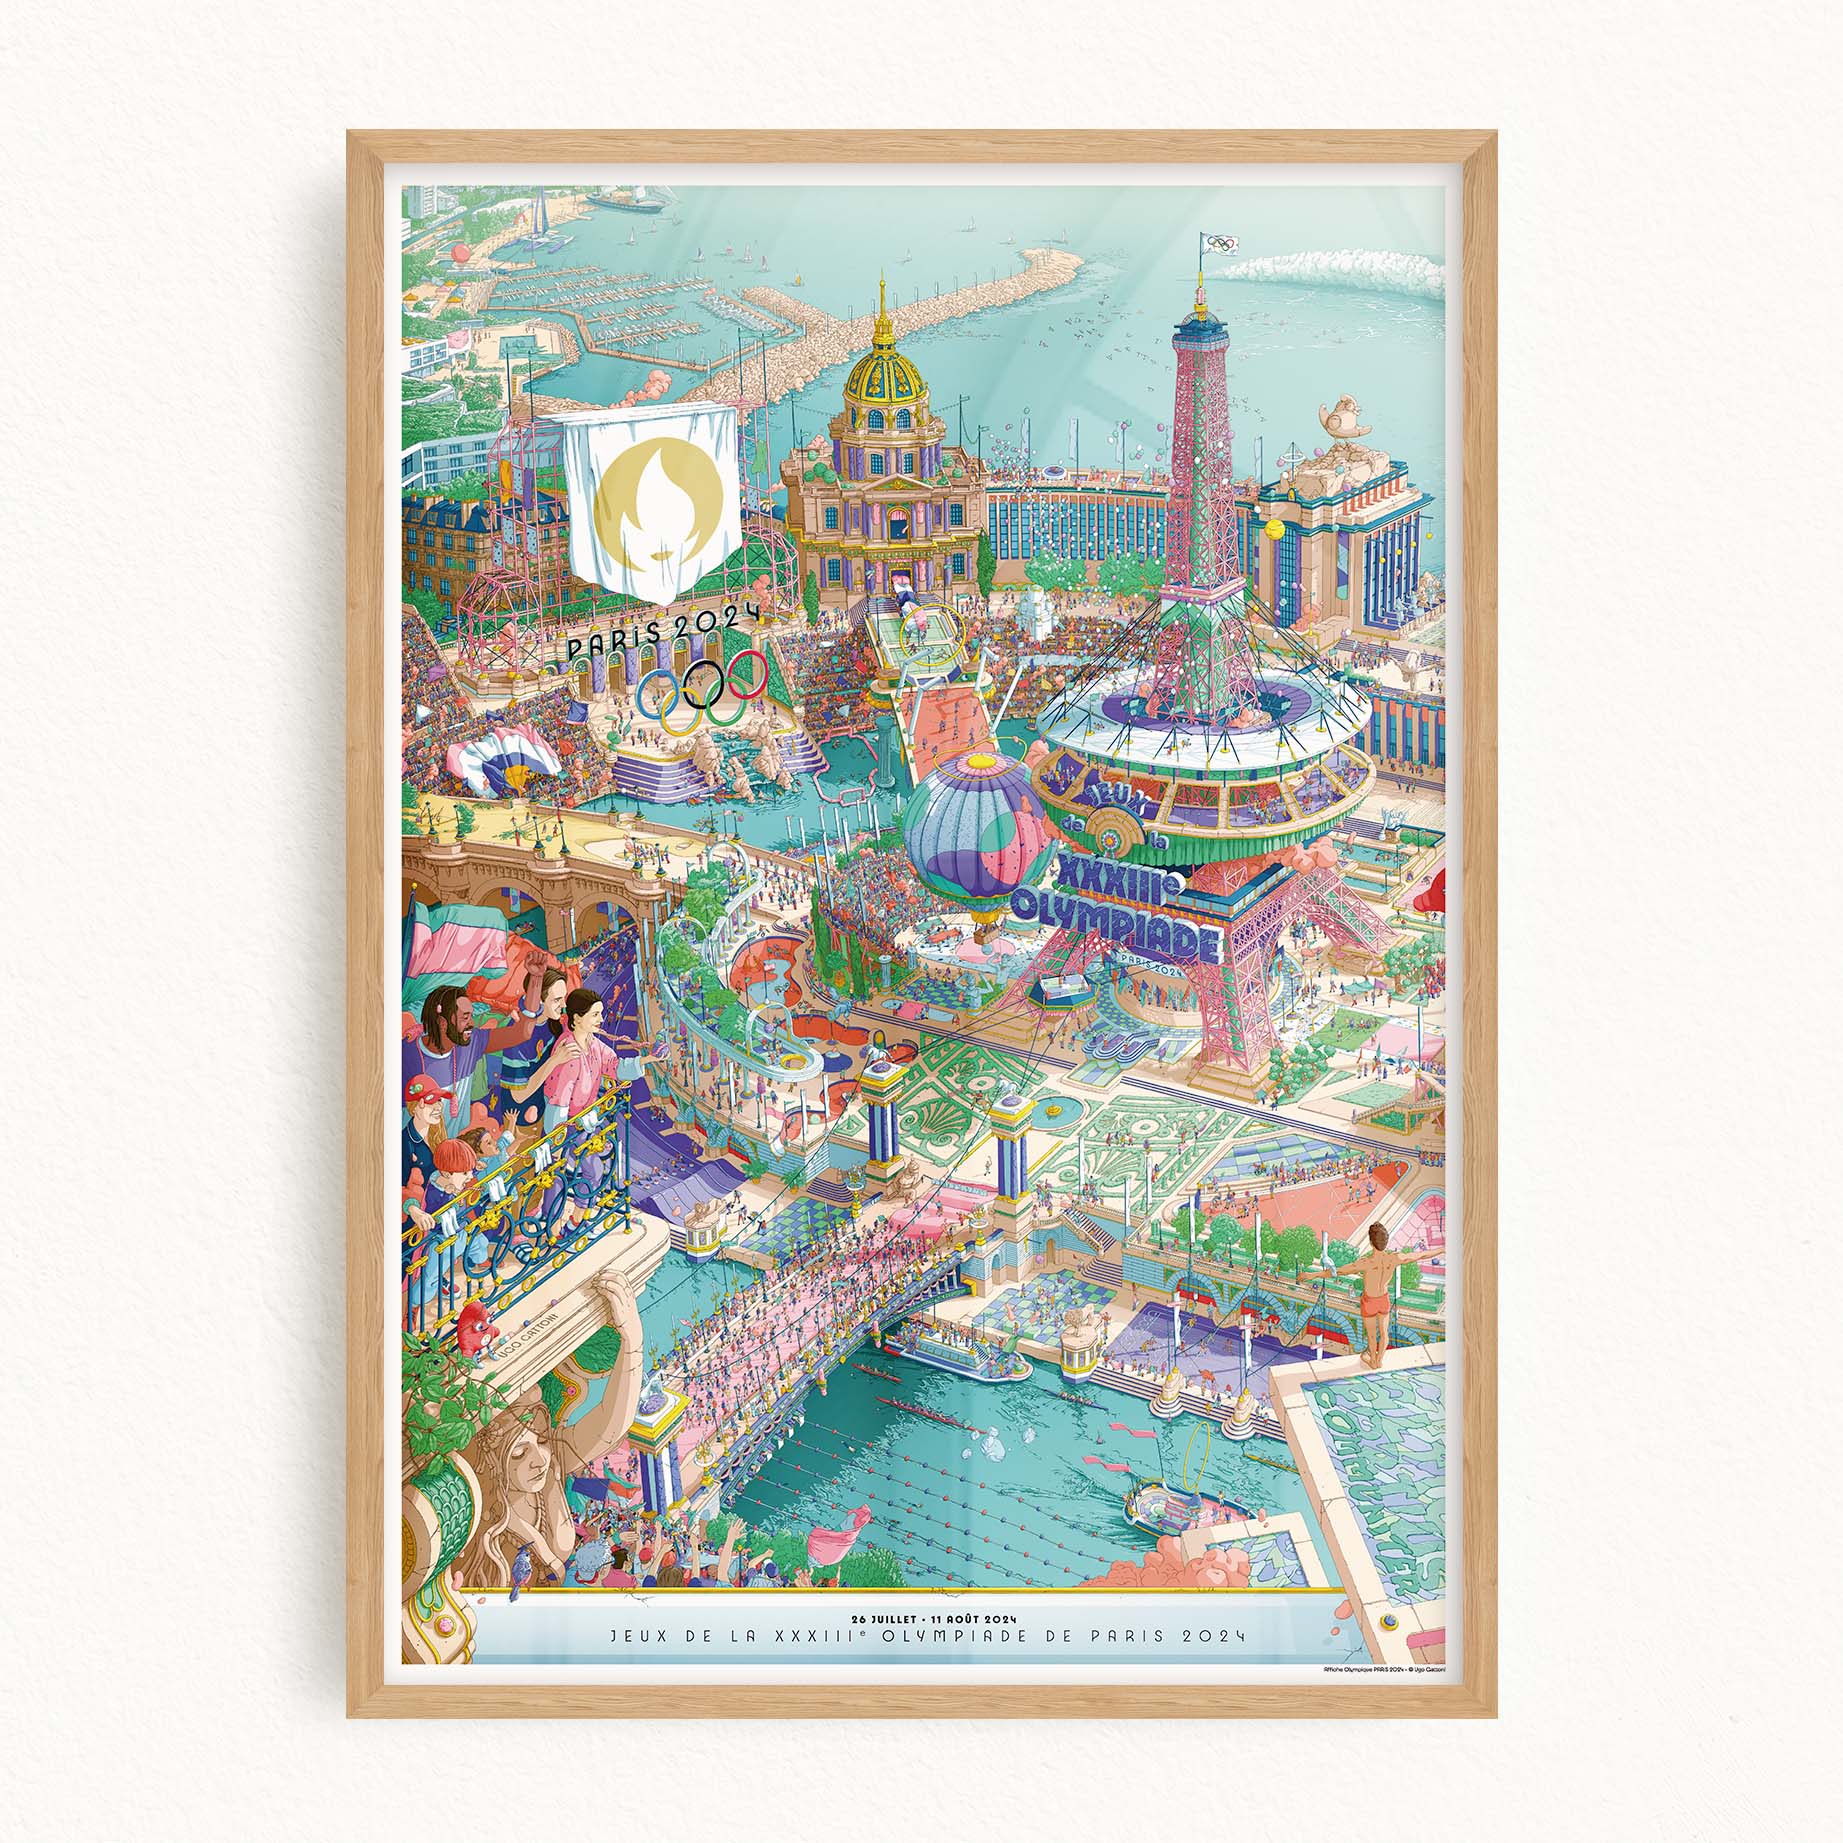 The official poster for the Paris 2024 Olympic Games - color